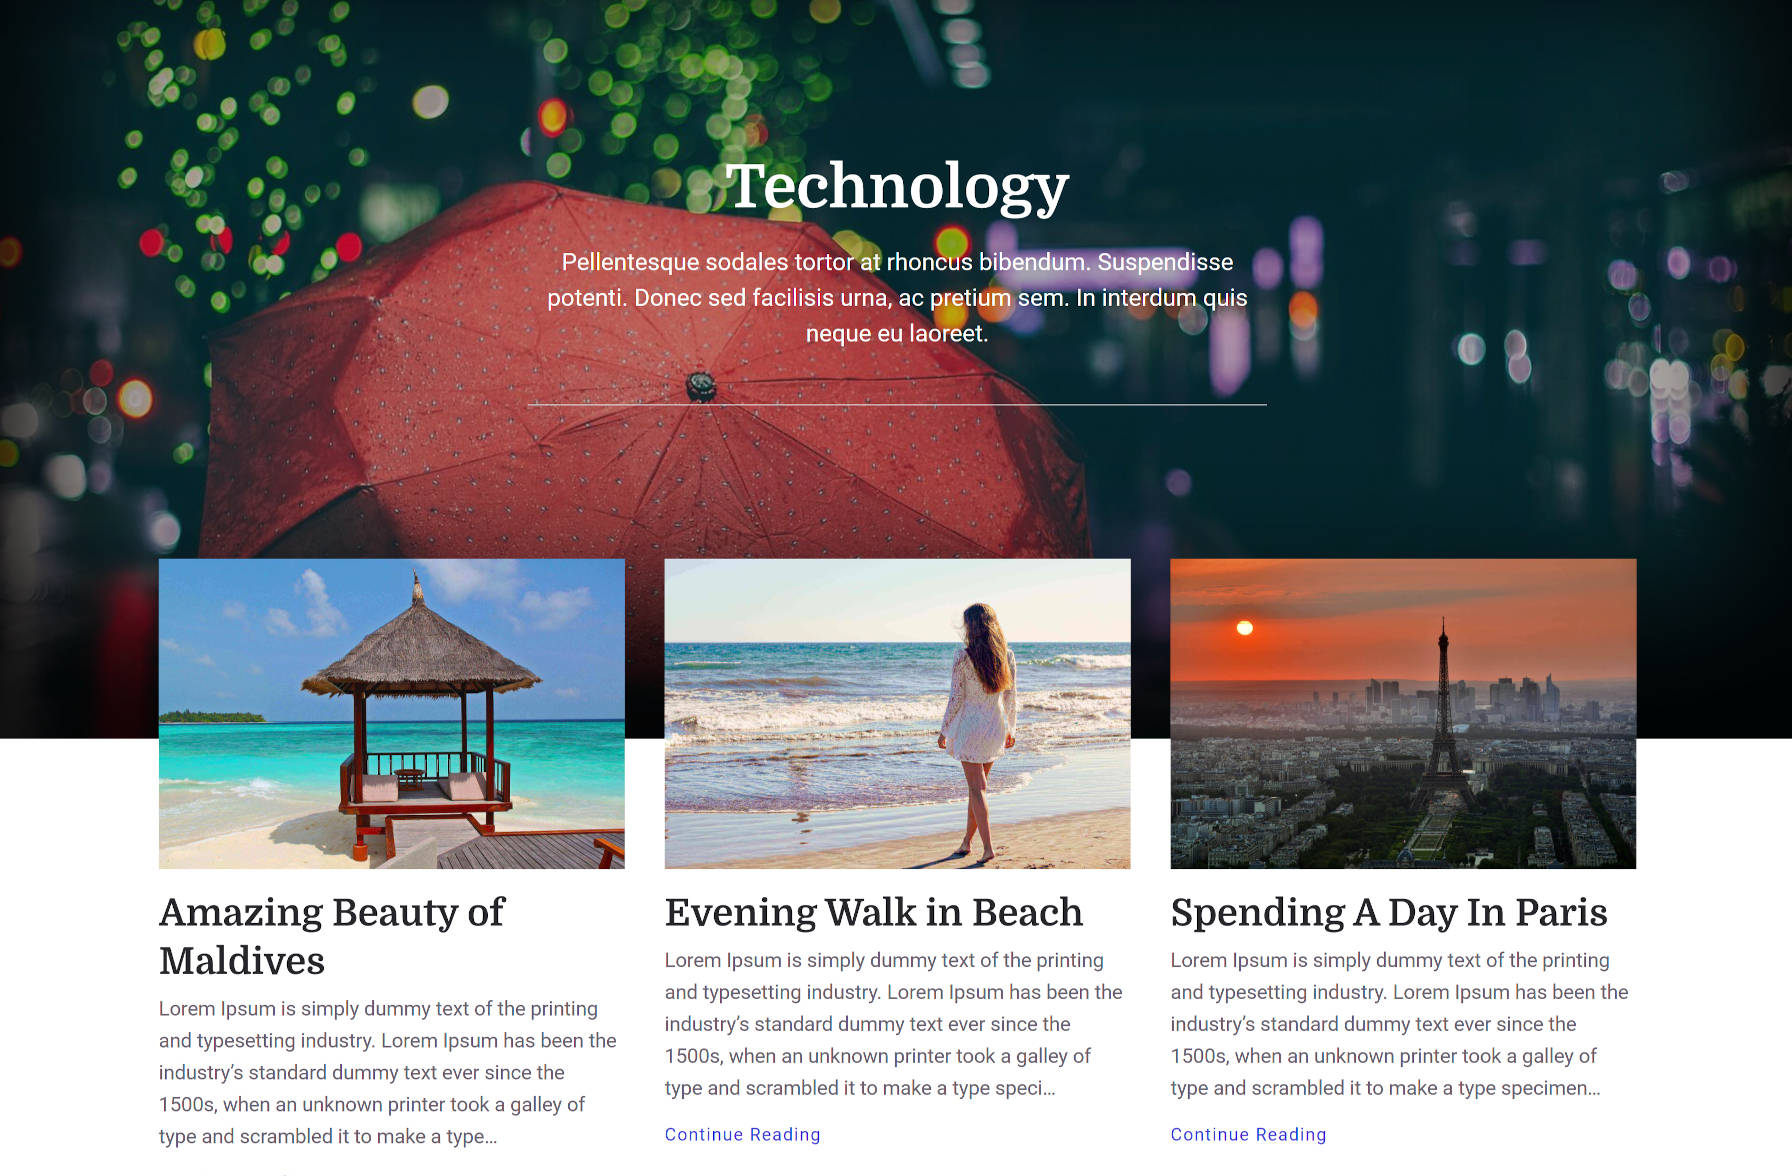 A lifestyle-type design with cover/hero area followed by grid-style posts.